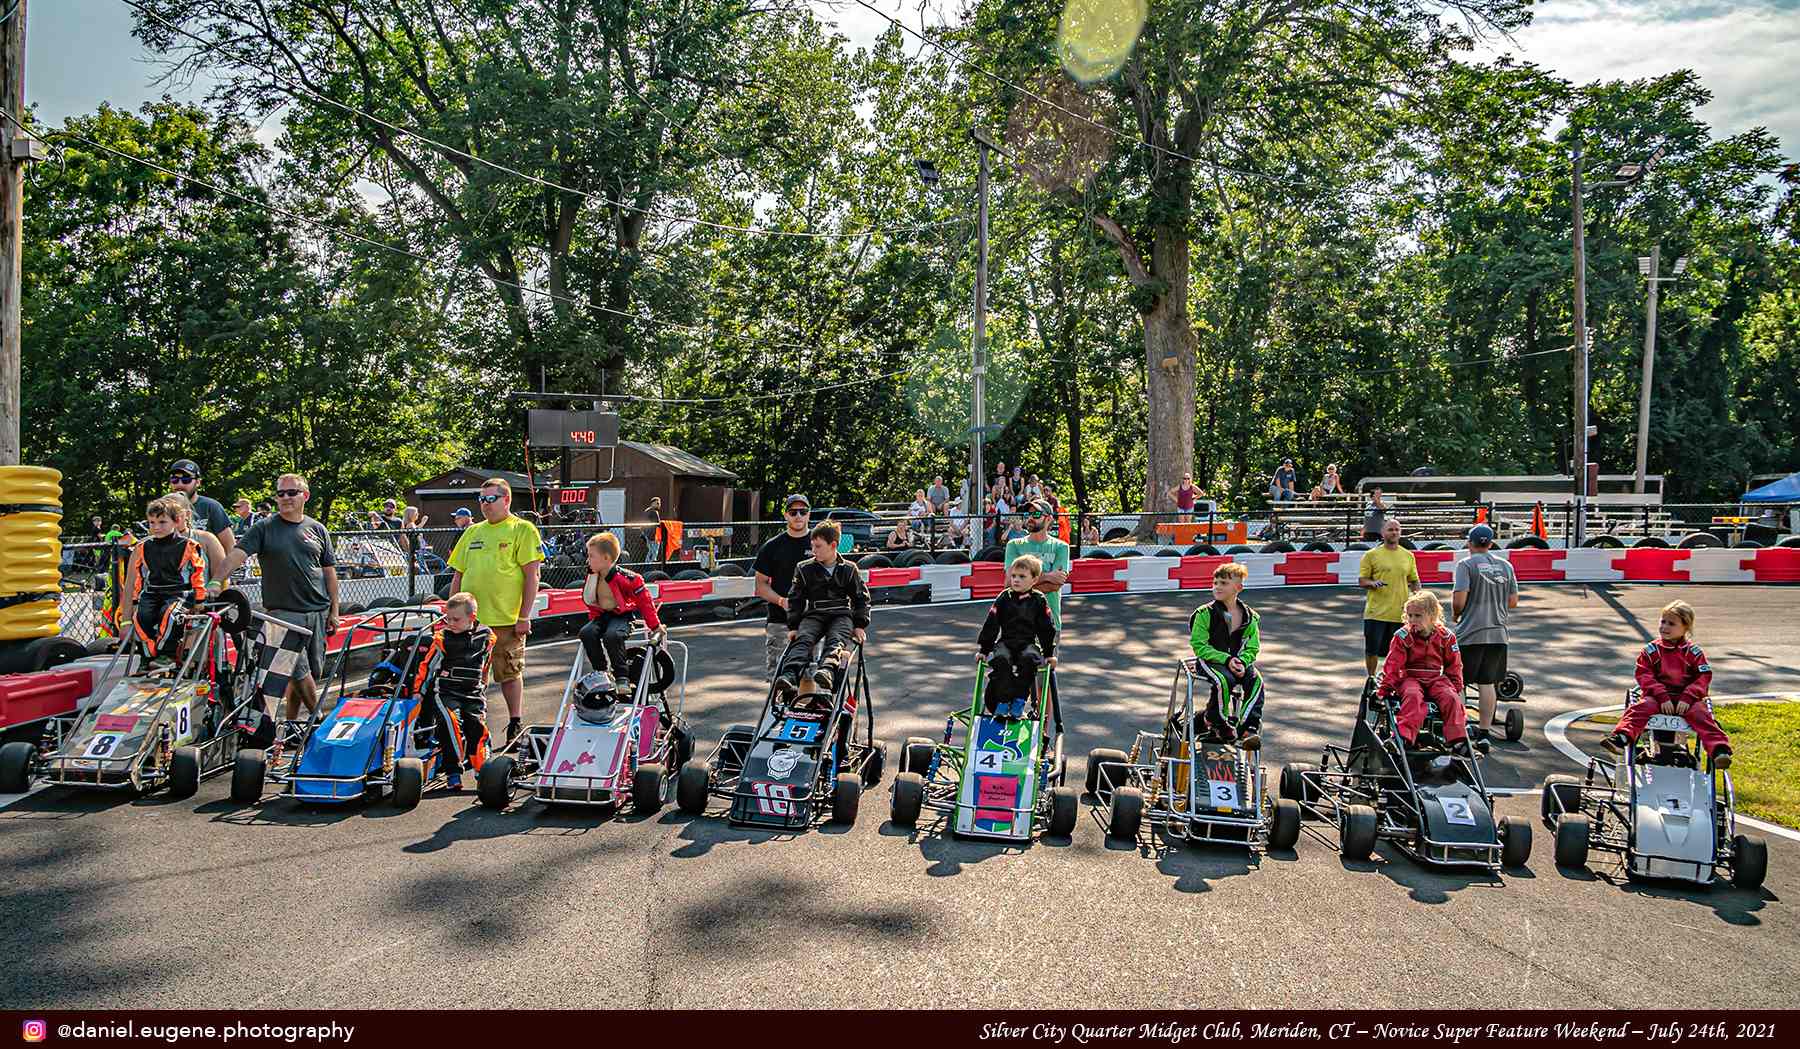 Kids Sitting on Karts of Different Colors Lined